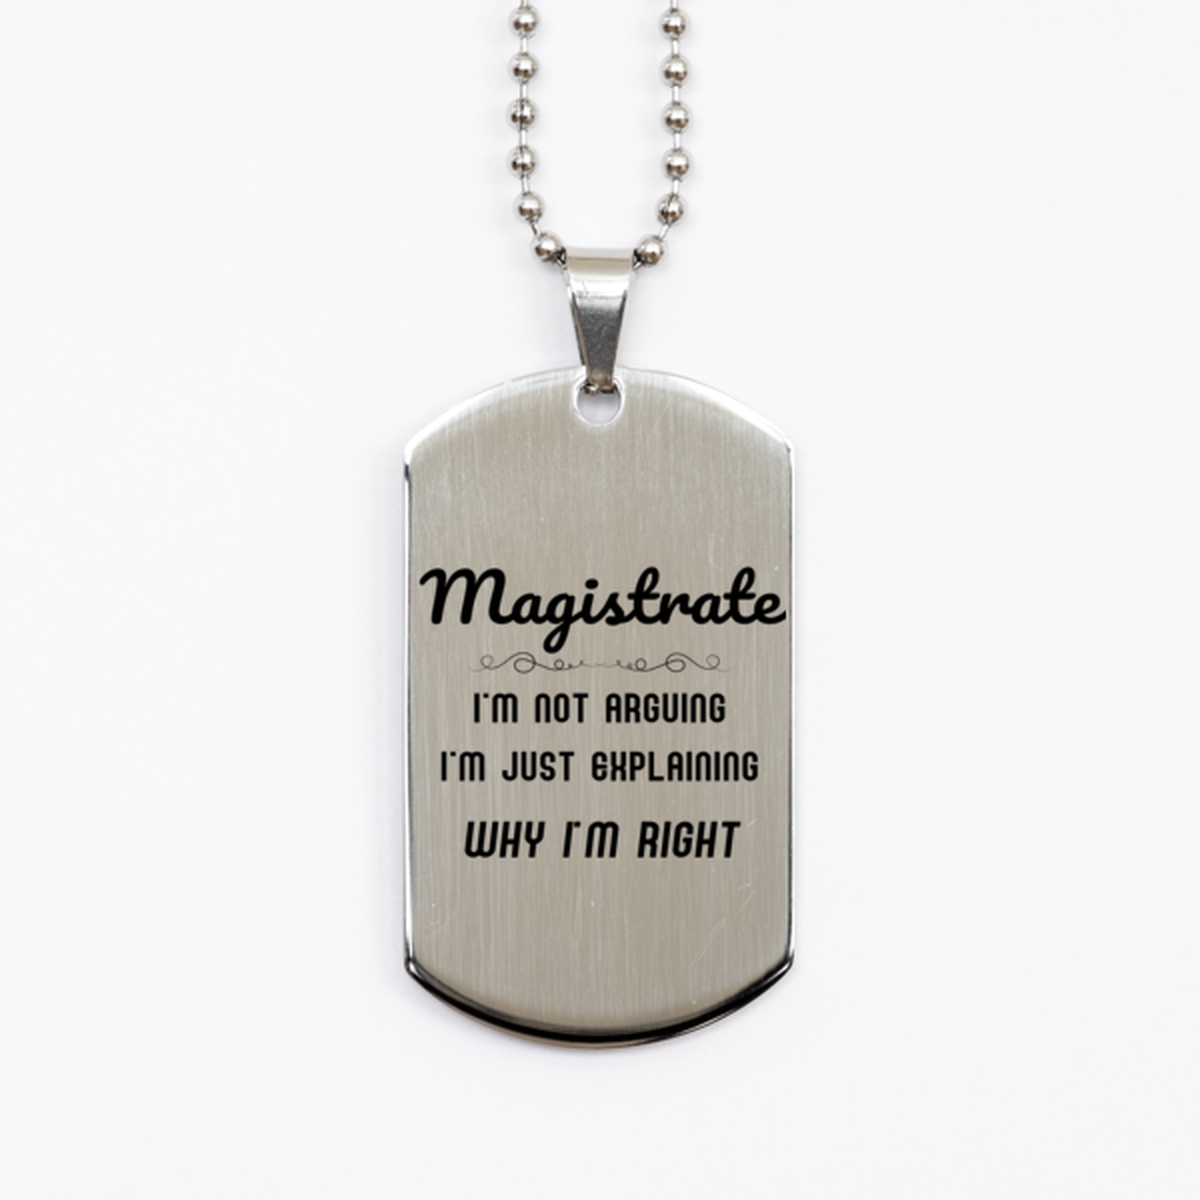 Magistrate I'm not Arguing. I'm Just Explaining Why I'm RIGHT Silver Dog Tag, Funny Saying Quote Magistrate Gifts For Magistrate Graduation Birthday Christmas Gifts for Men Women Coworker